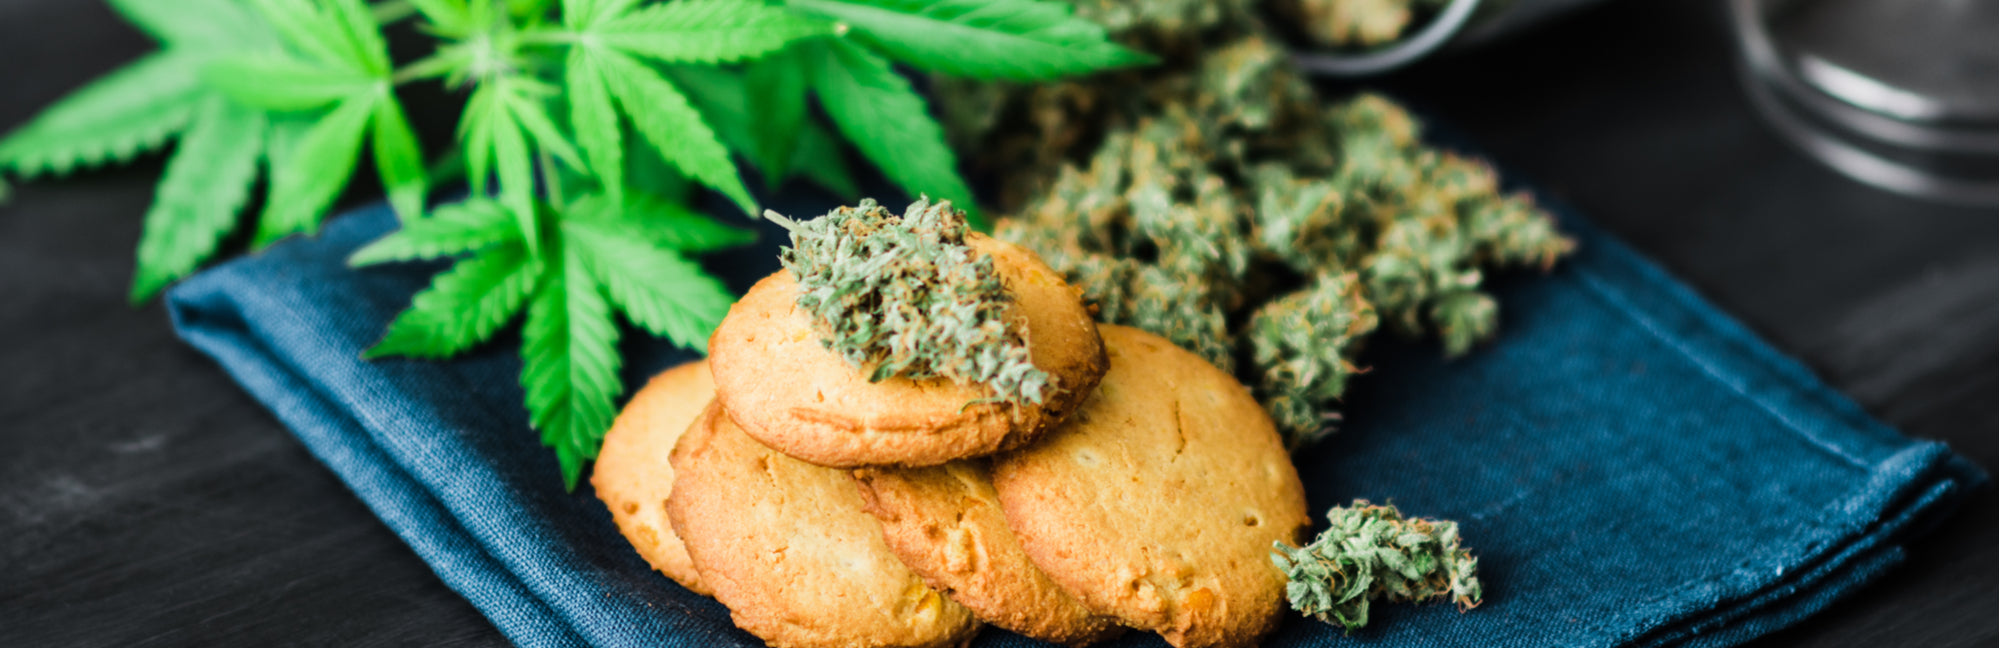 Consuming Edibles: A Beginners Guide